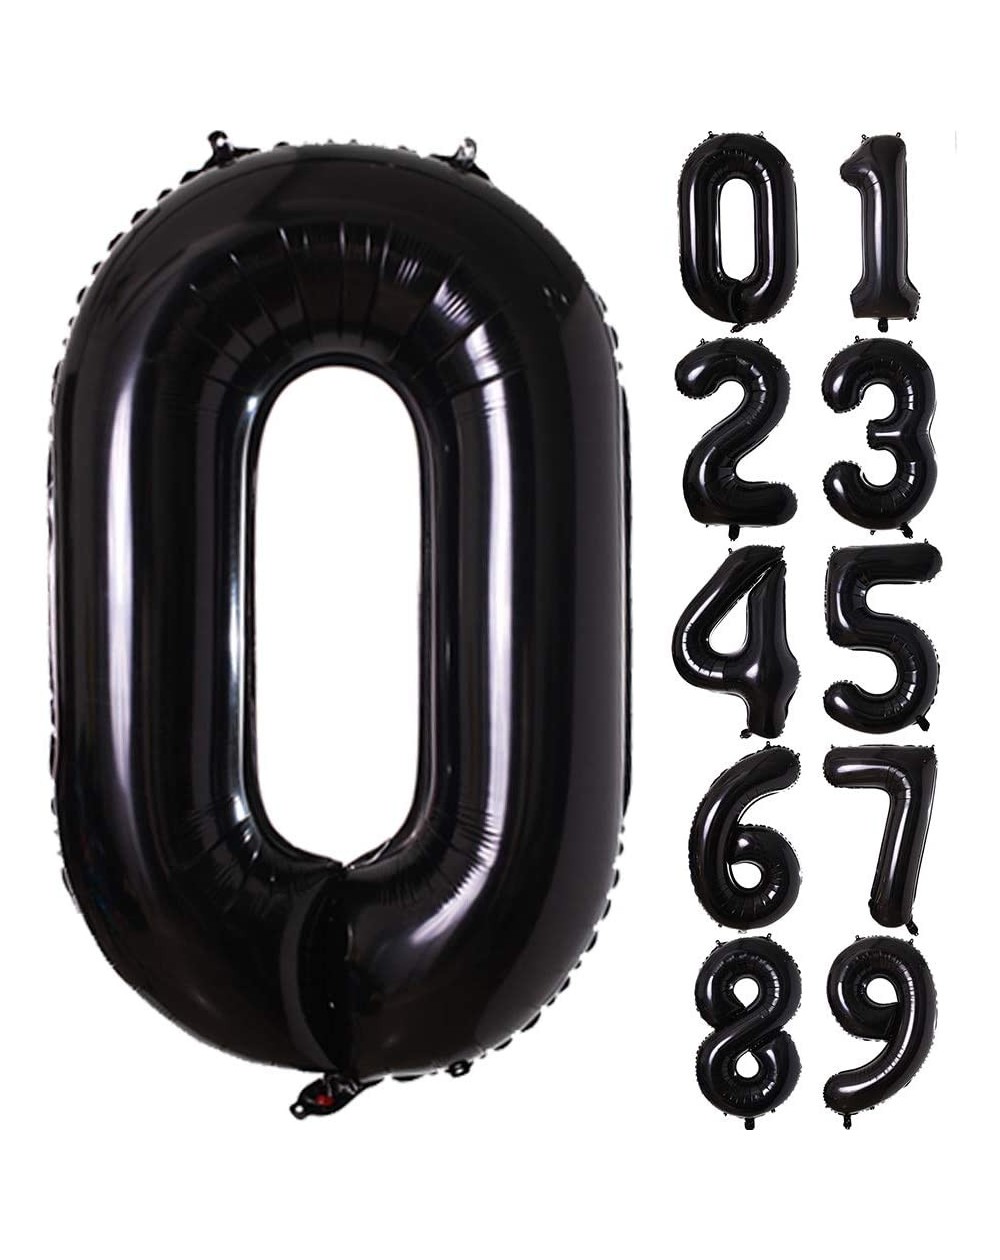 Balloons 40 Inch Black Number Foil Balloons 0-9 Balloons- Foil Mylar Digital Number 0 Balloons for Birthday Party Decorations...